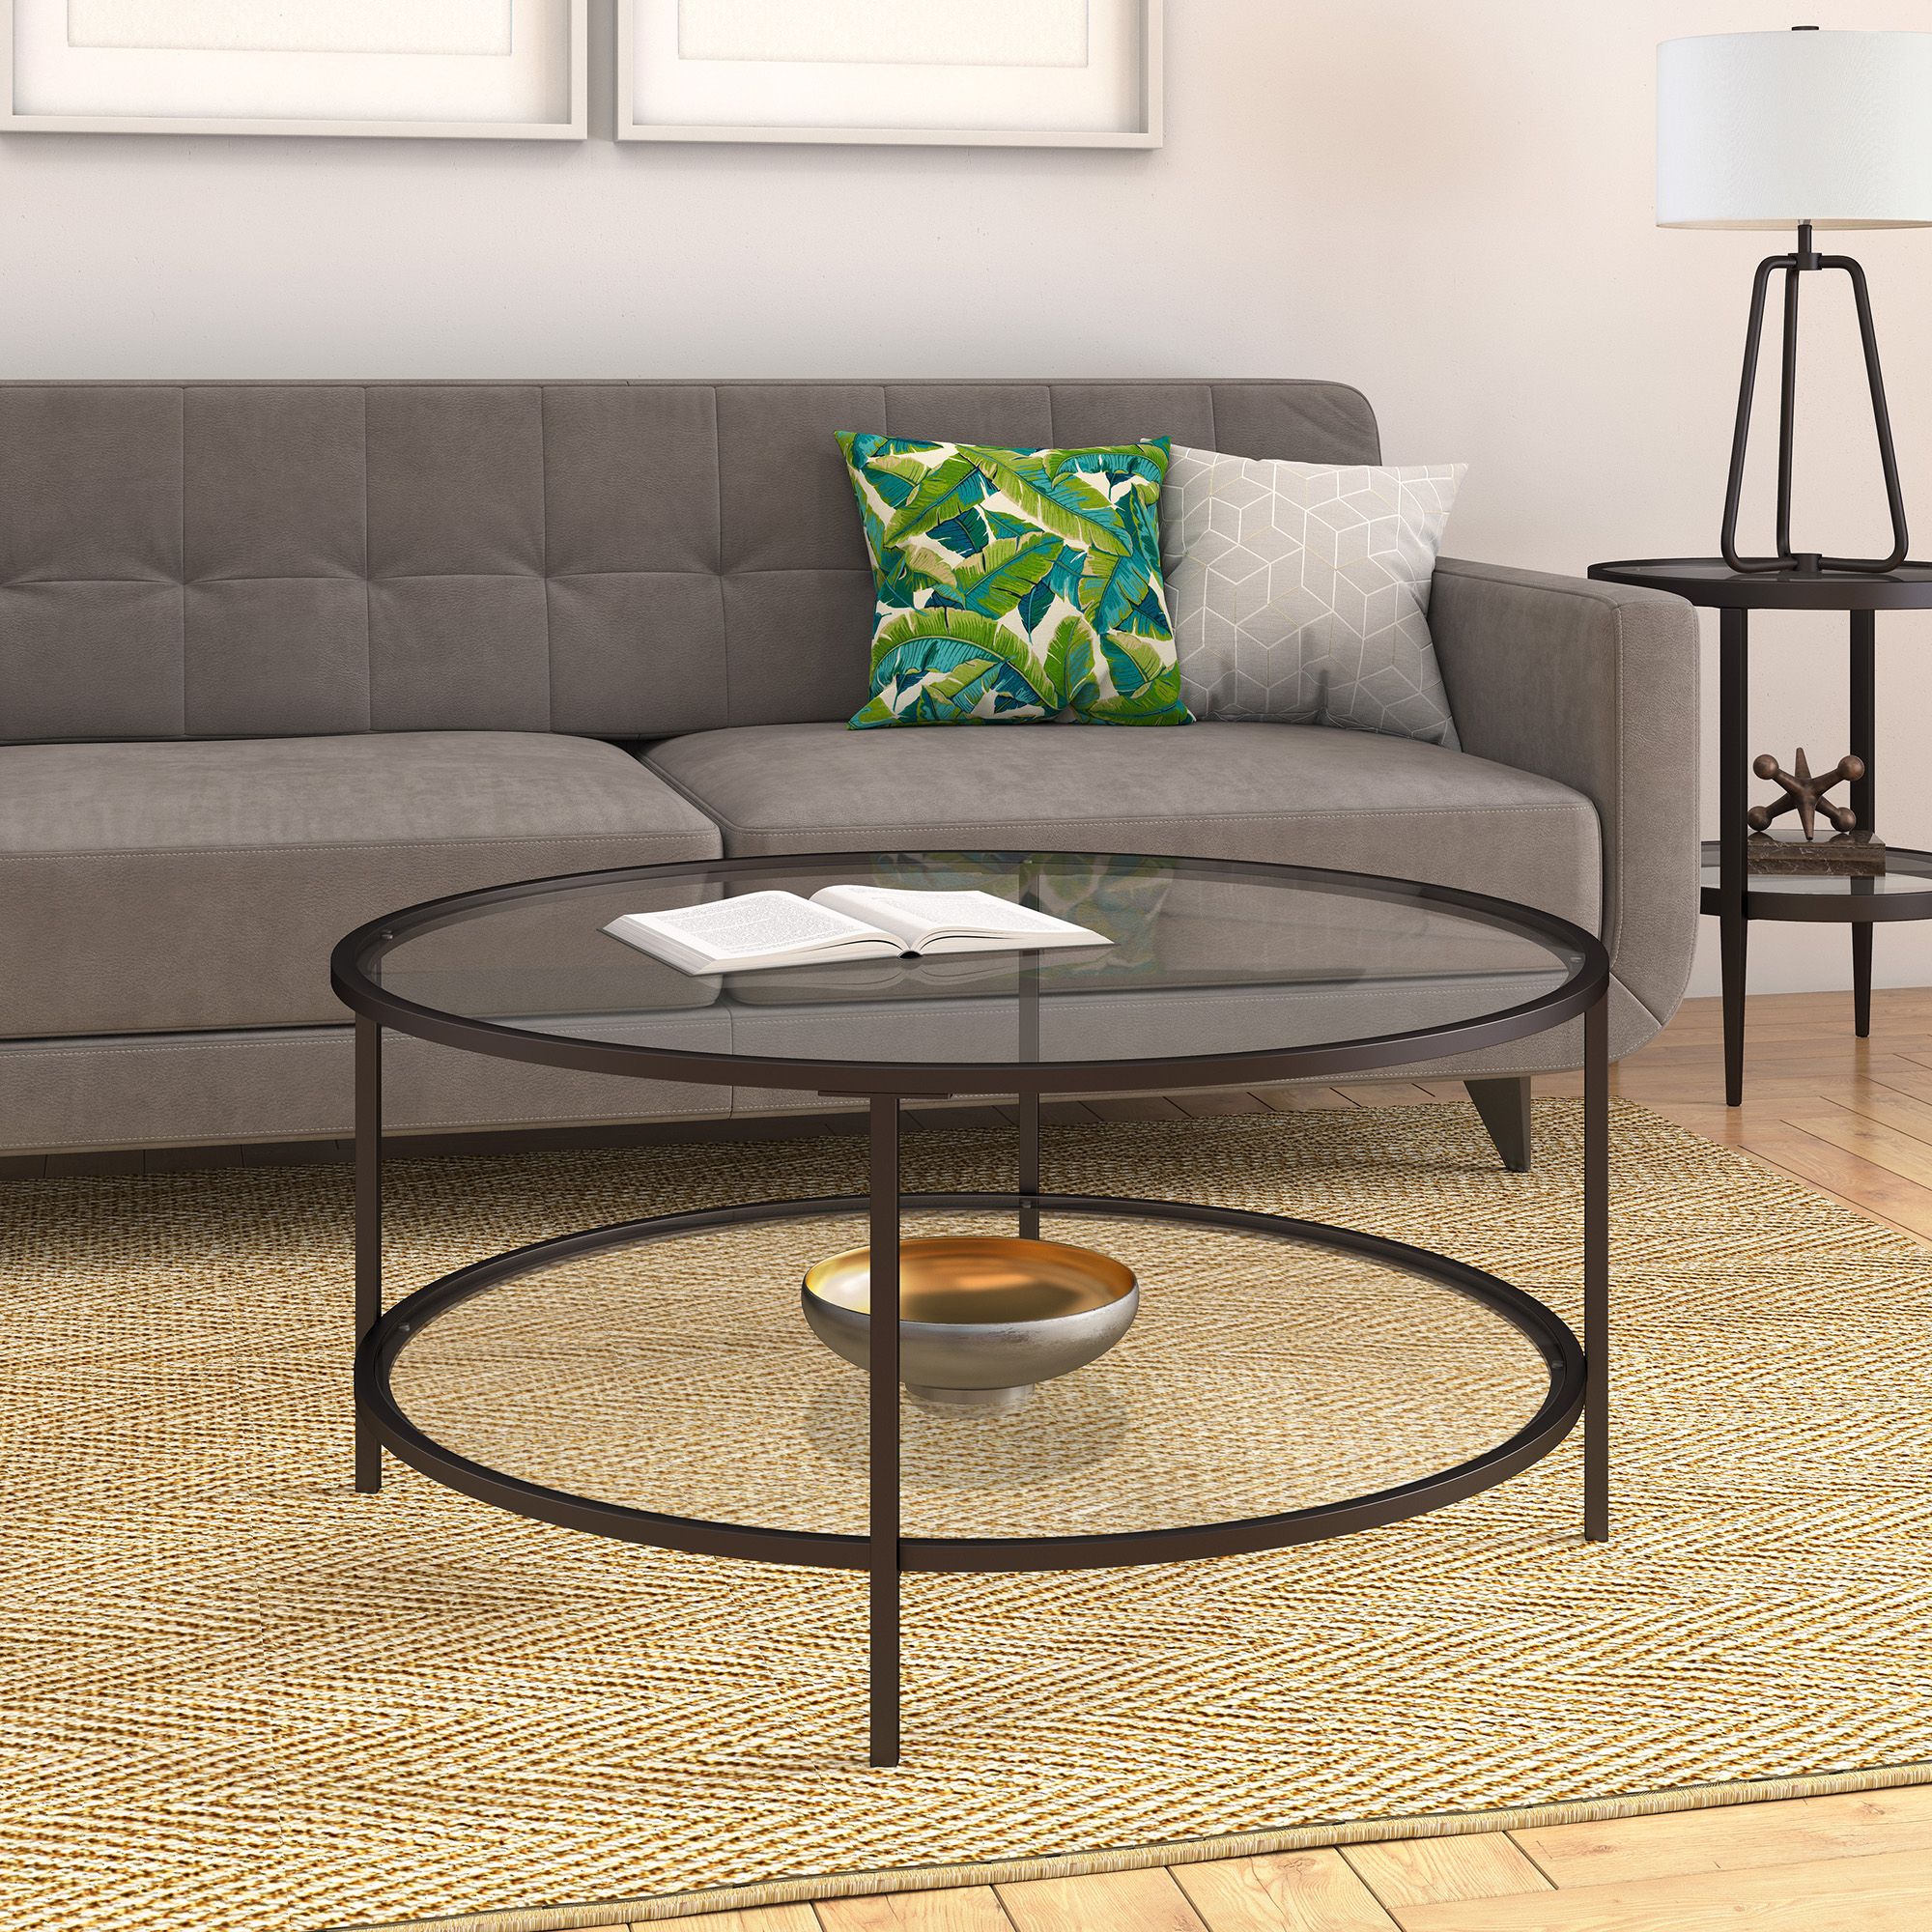 Orwell Coffee Table In Blackened Bronze With Glass Shelf – Walmart Inside Well Liked 3 Piece Shelf Coffee Tables (View 3 of 10)